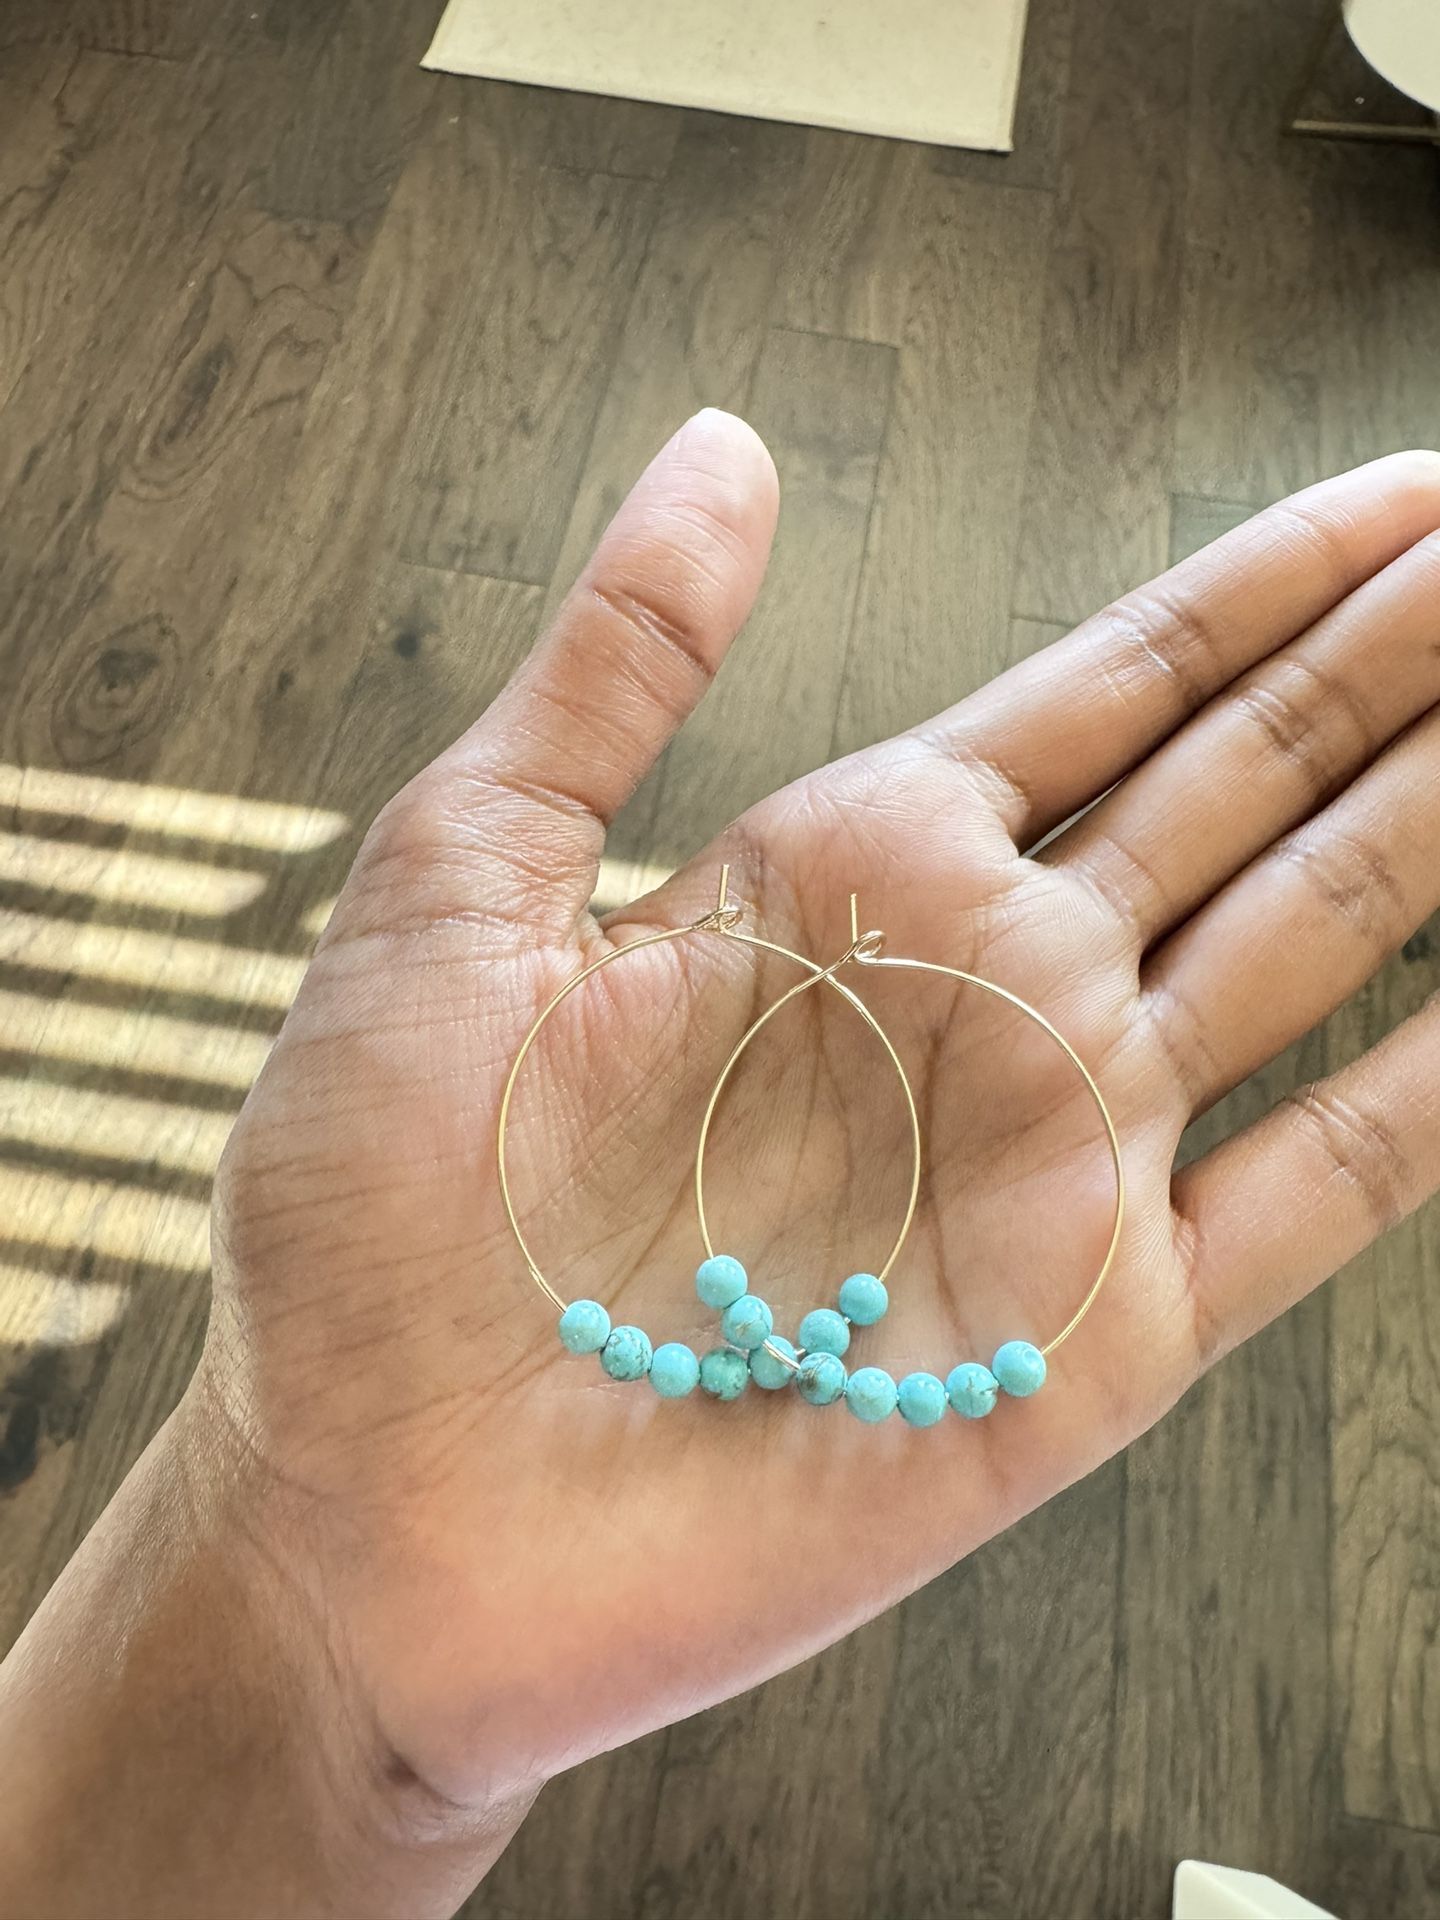 Turquoise earrings, Gold Plated Hoops, Handmade Jewelry 